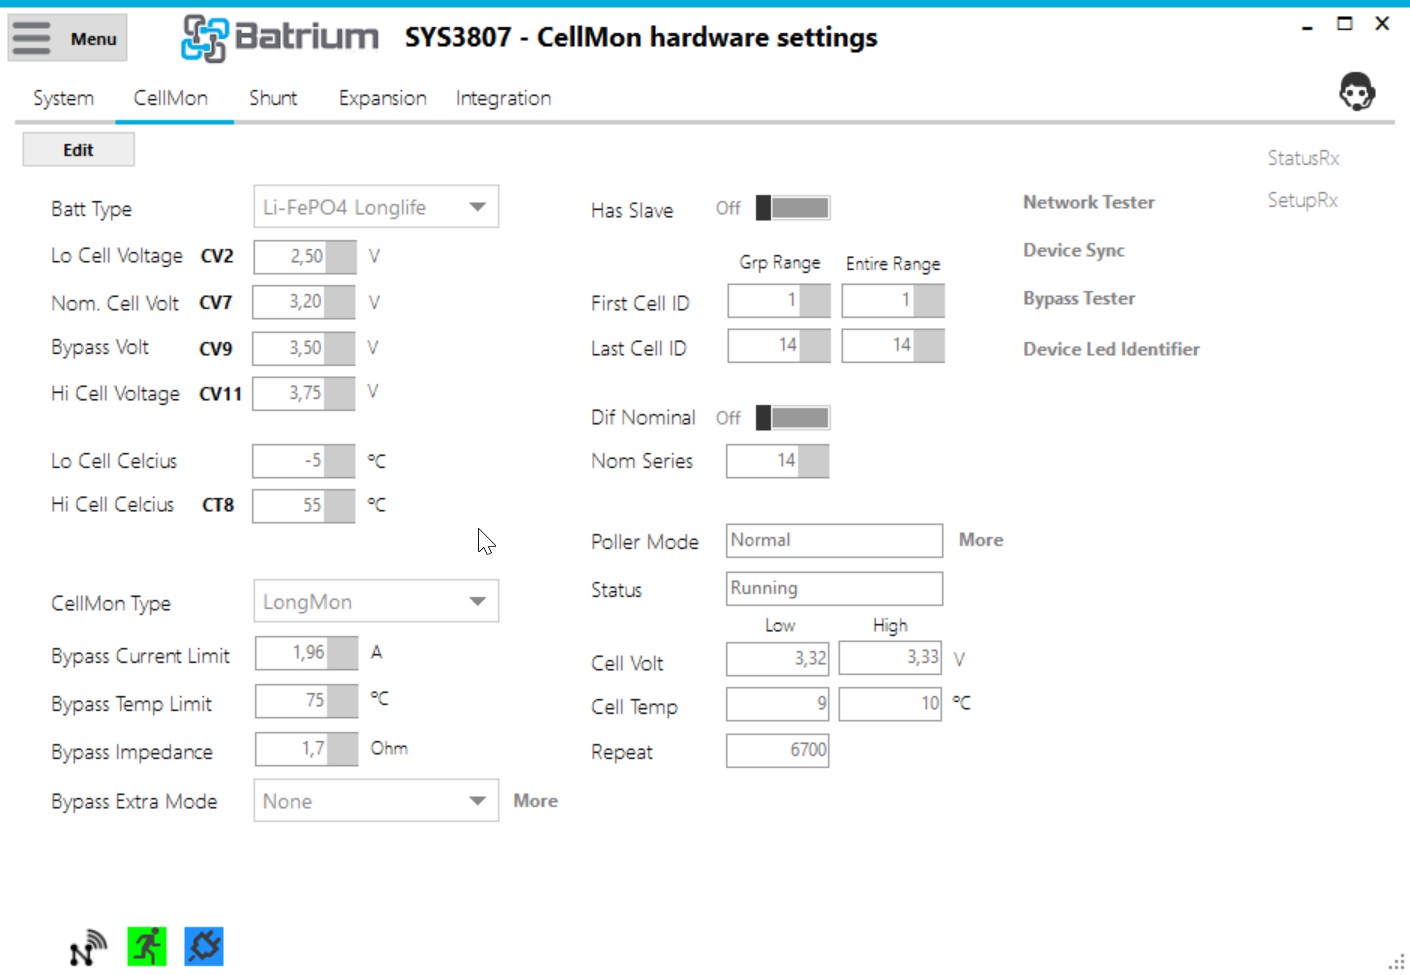 2021-04-22 20_30_41-SYS3807 - CellMon hardware settings.png